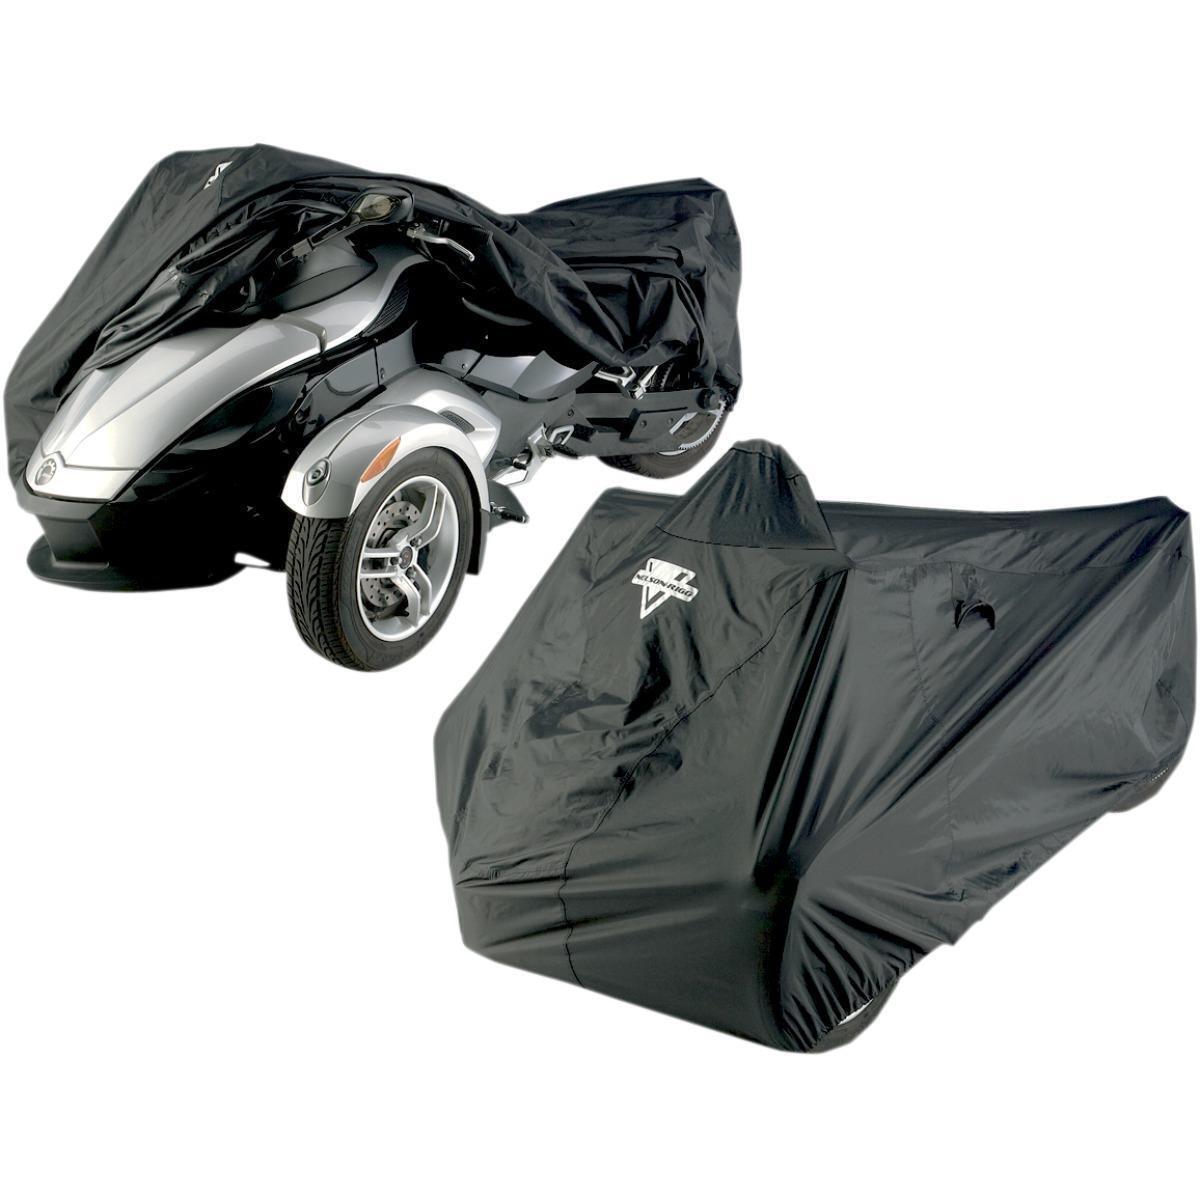 NEW Nelson Rigg Motorcycle Can-Am Spyder Cover Full CAS-370